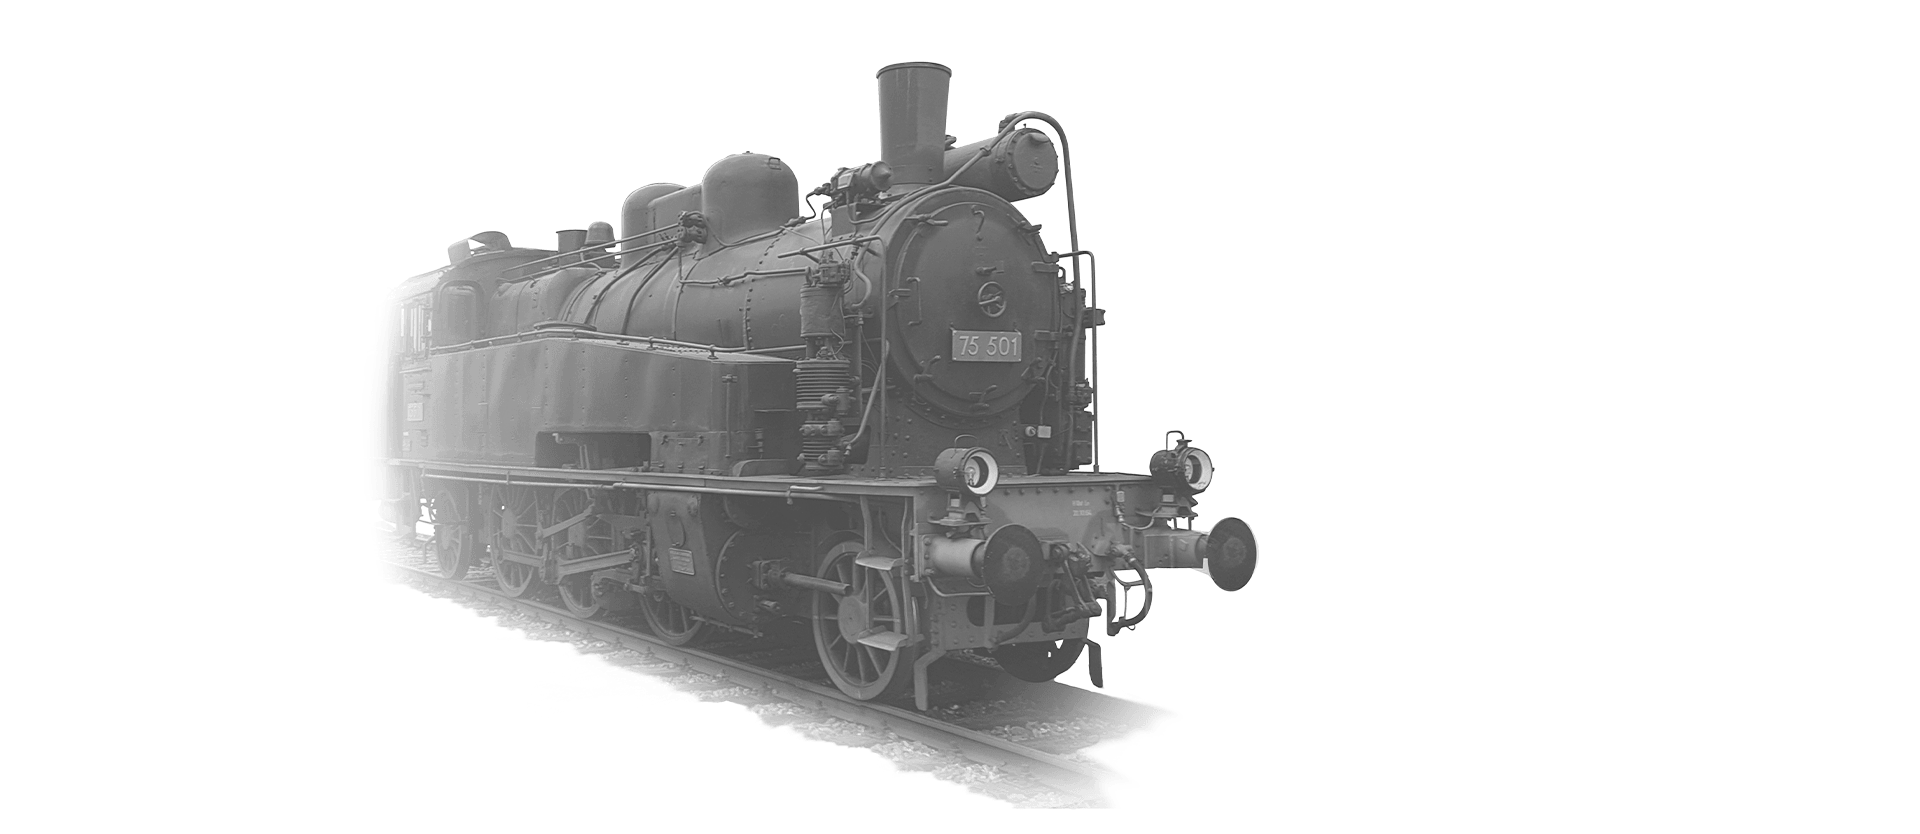 The locomotive 75-501 is coming towards the camera in black and white